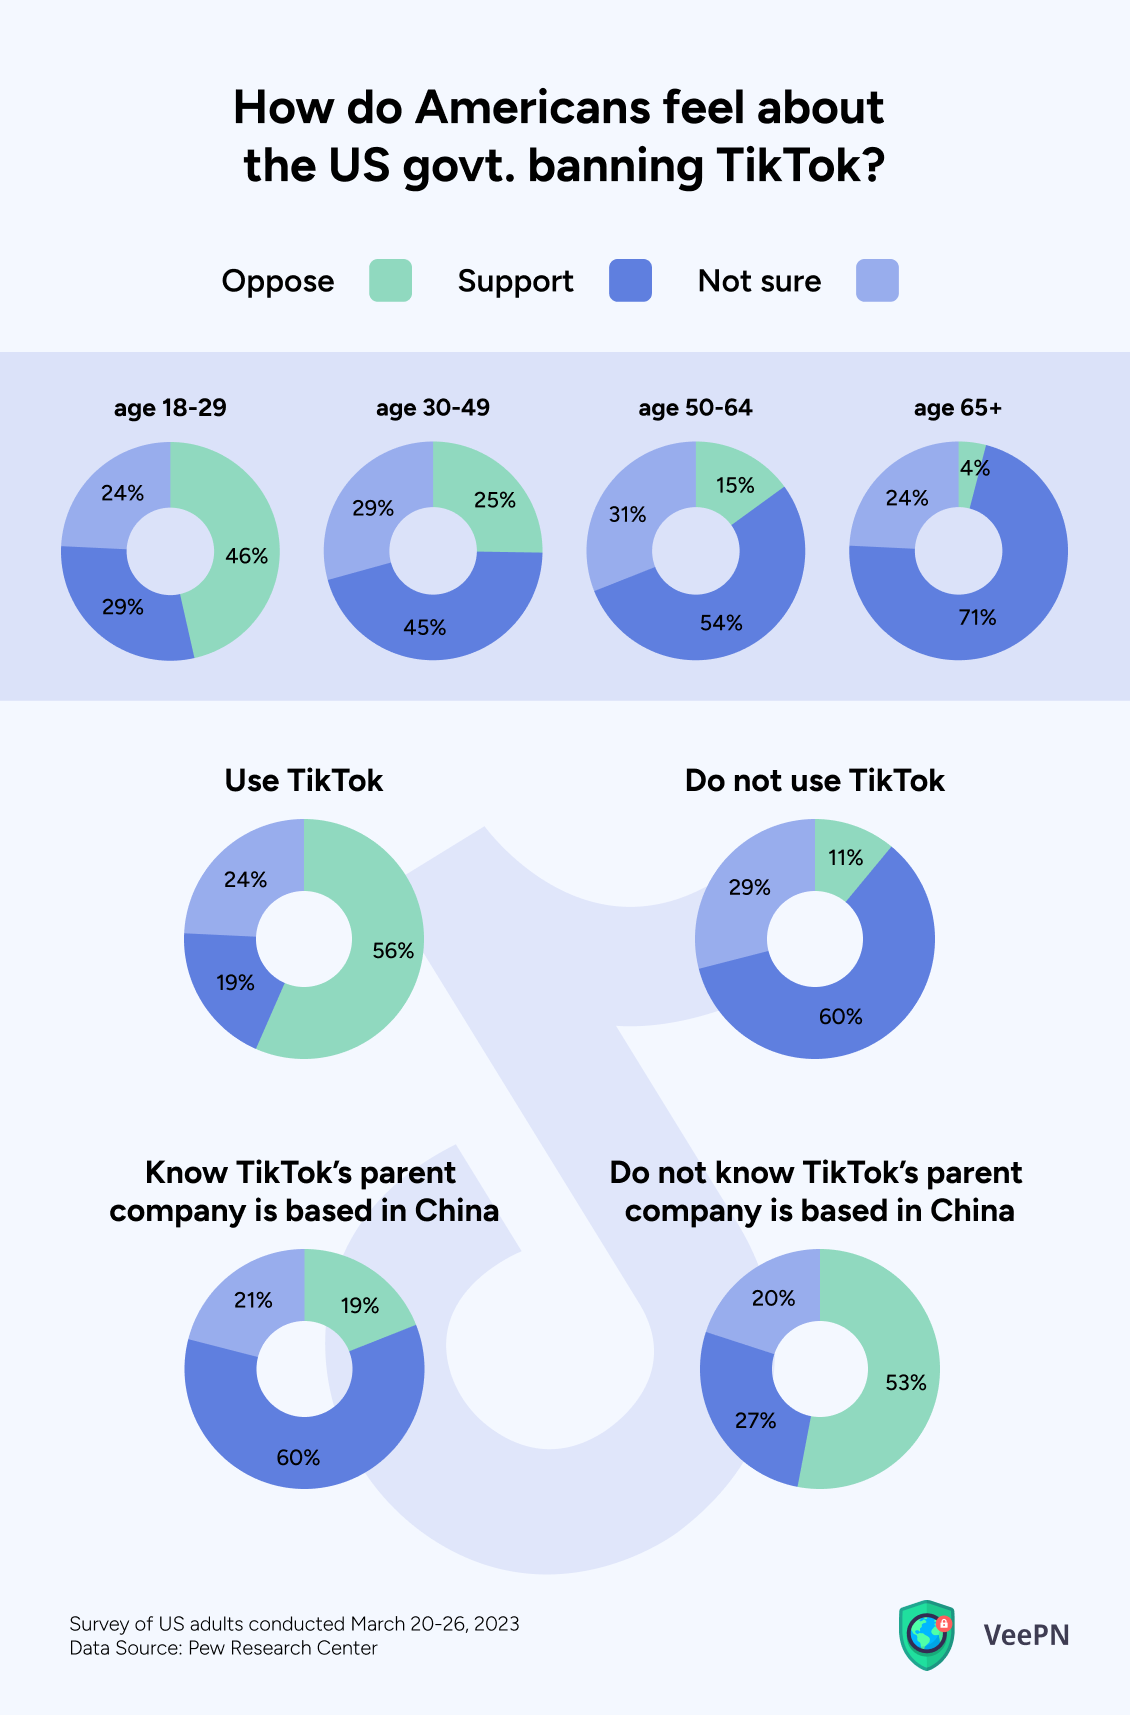 TikTok banned in the US: How do Americans feel about it? 